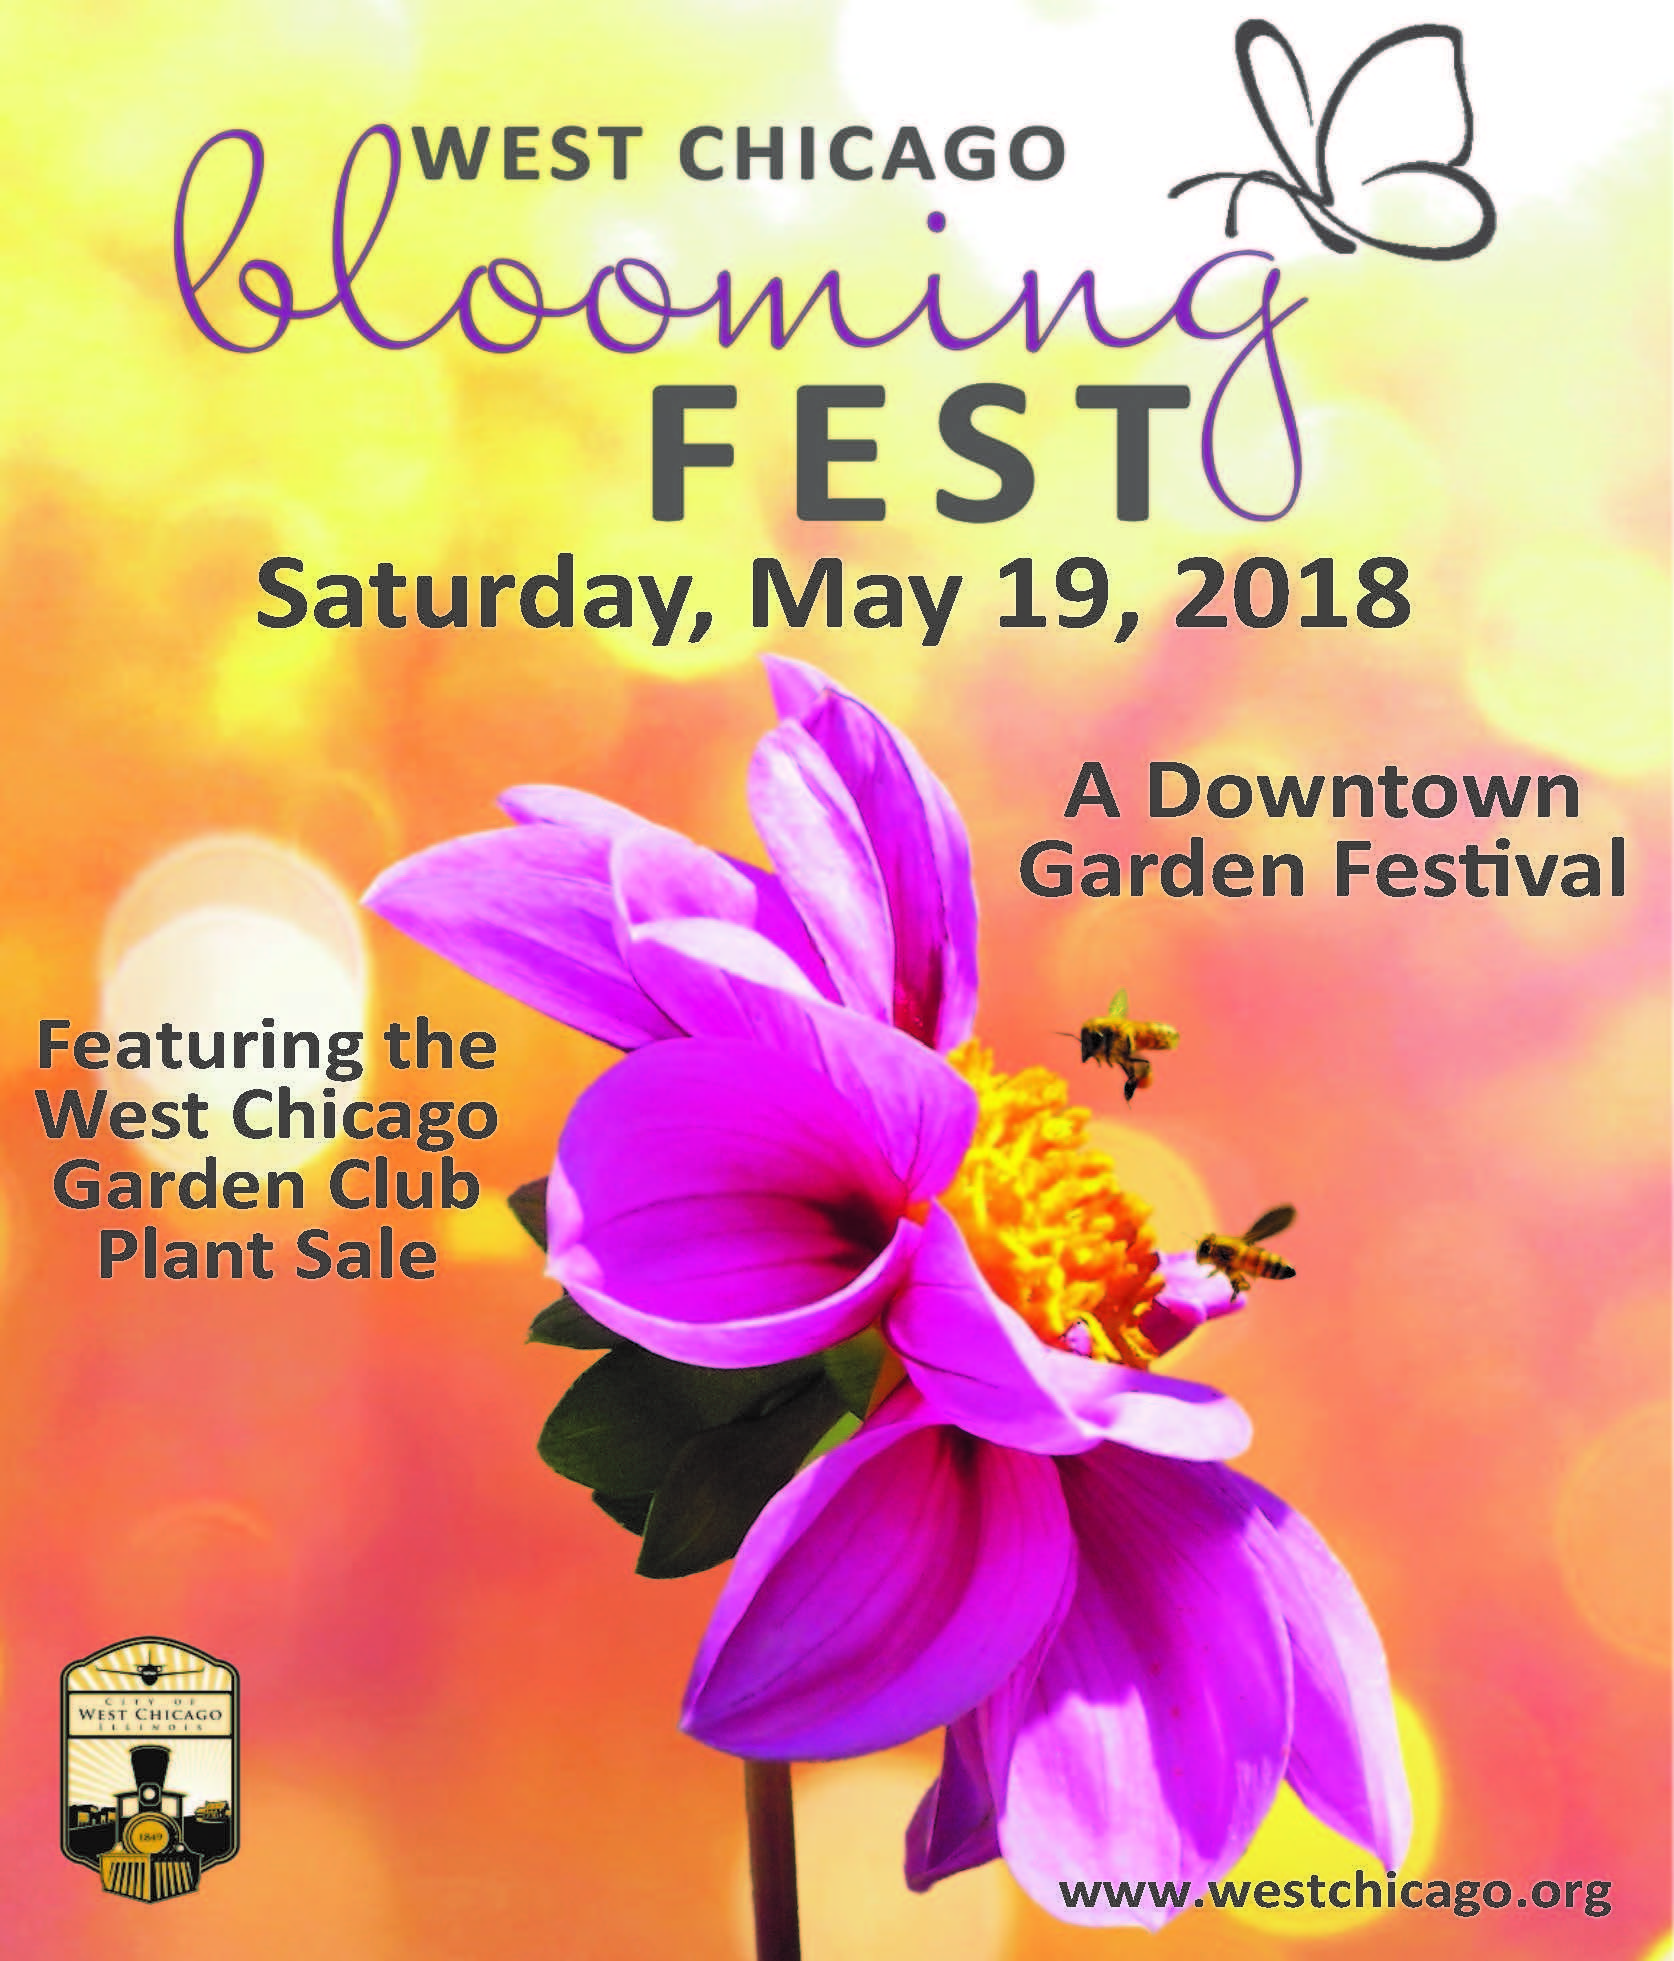 Blooming Fest Returns to Downtown West Chicago - Chicago Tribune